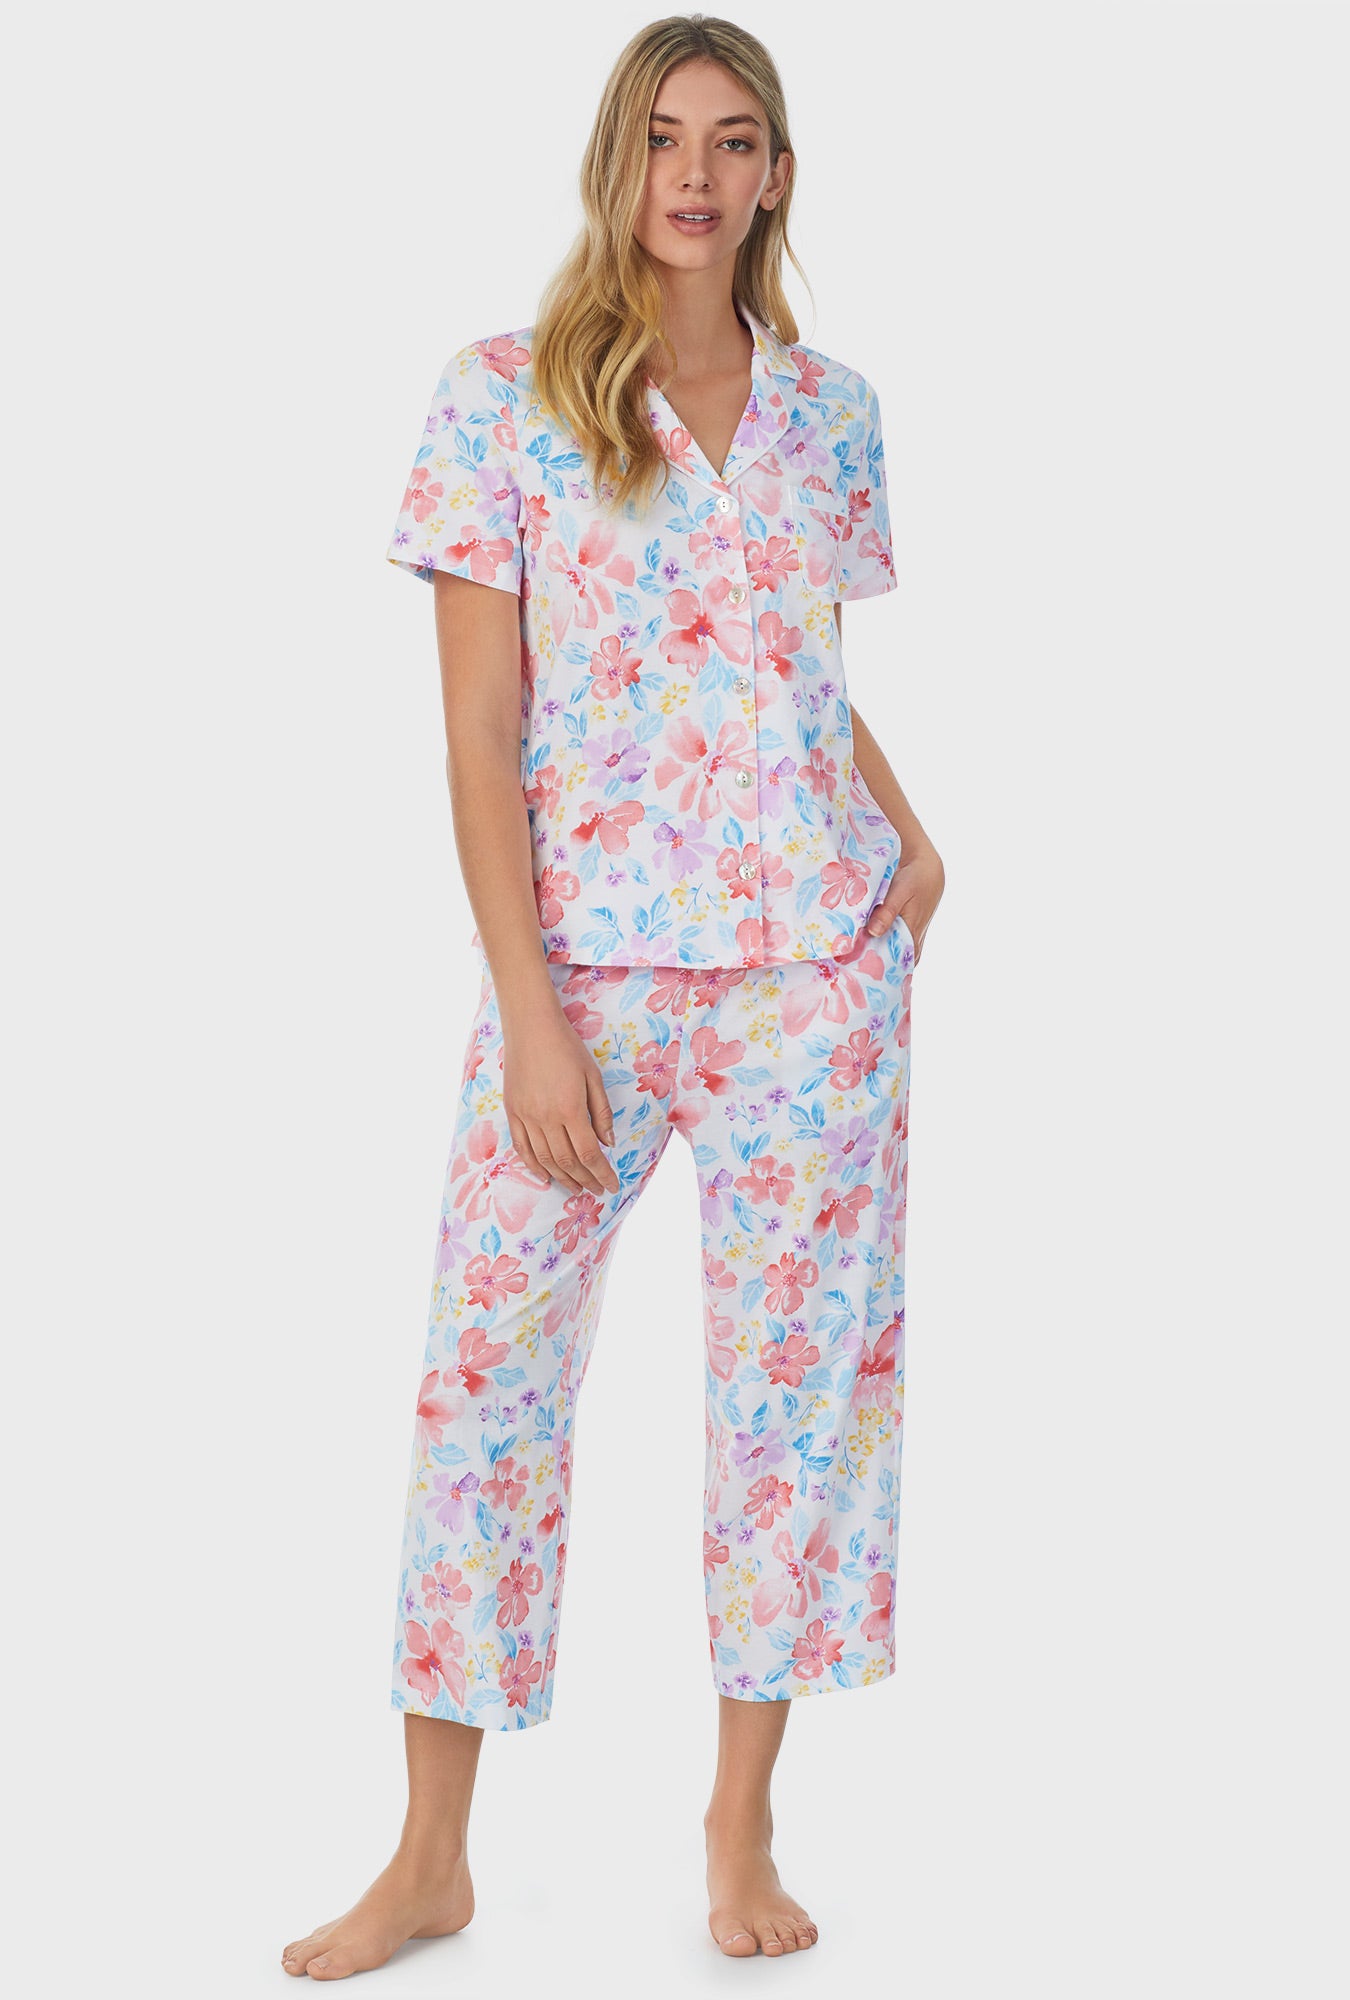 A lady wearing white short sleeve Capri Pajama Set with Tropical Blooms print